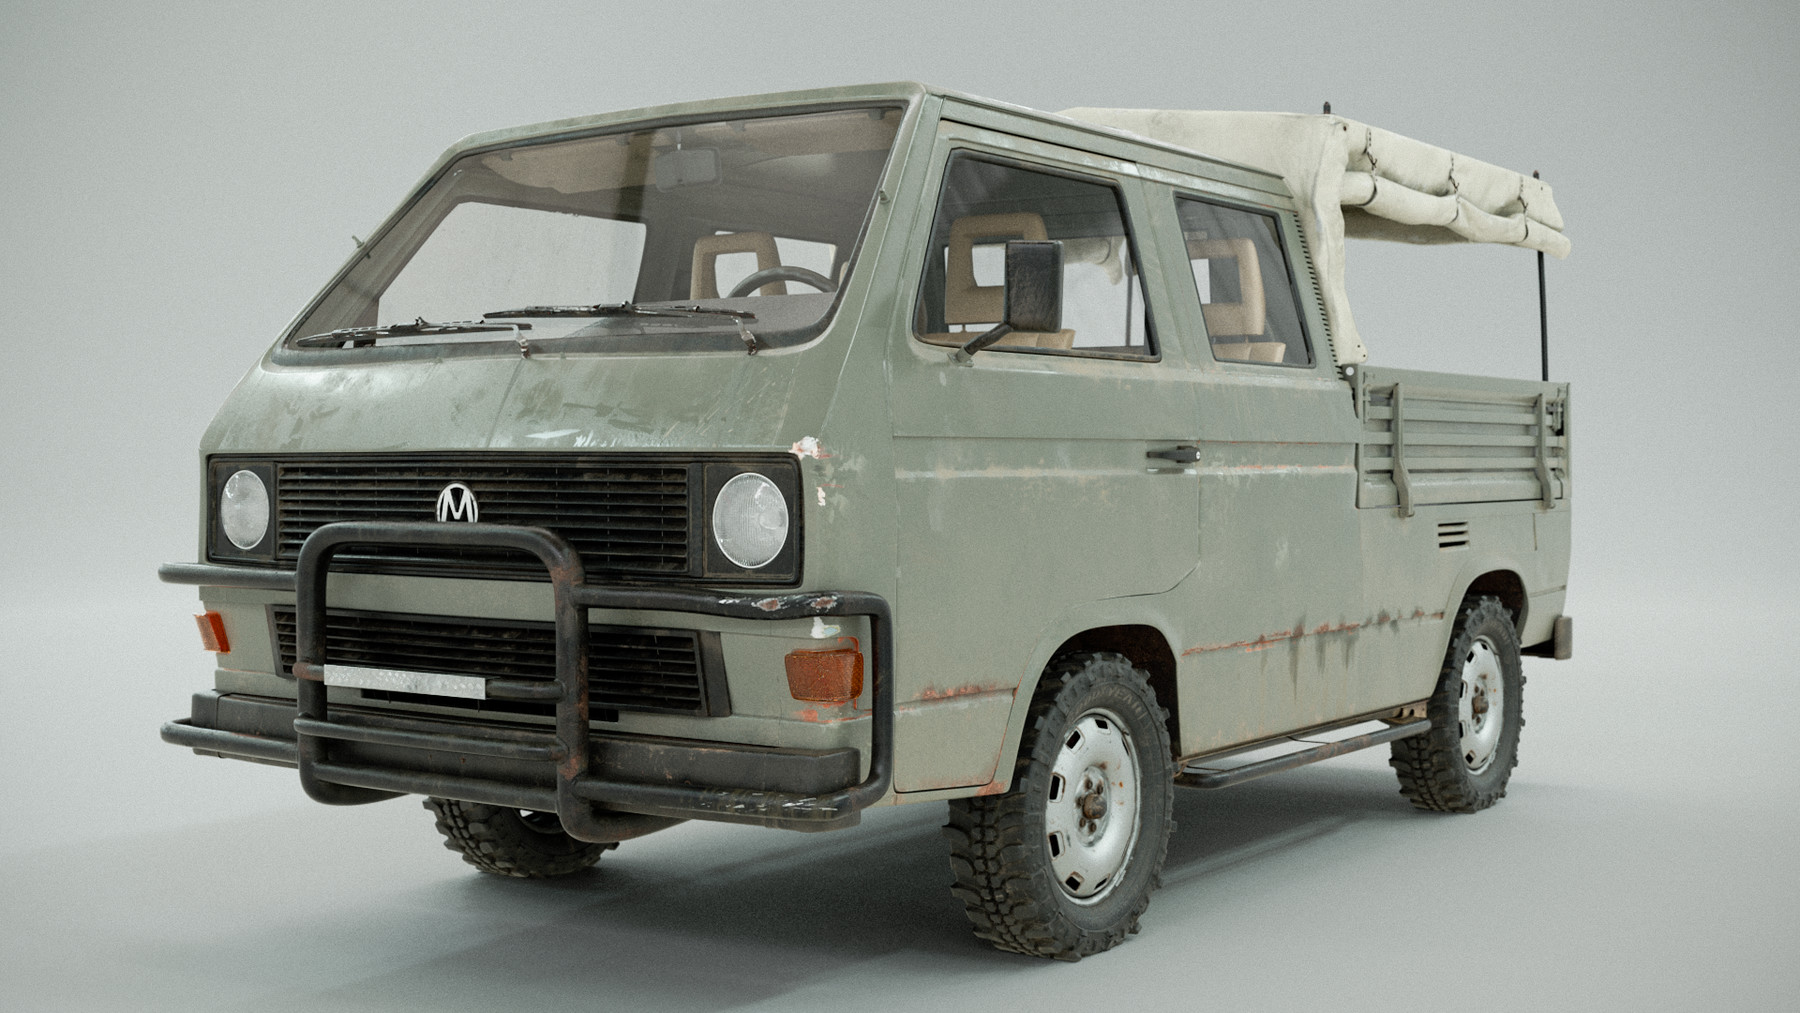 ArtStation - PBR 3D model - Volkswagen T3 - army car project. High poly, 32 UDIMs. Dirty and clean | Resources